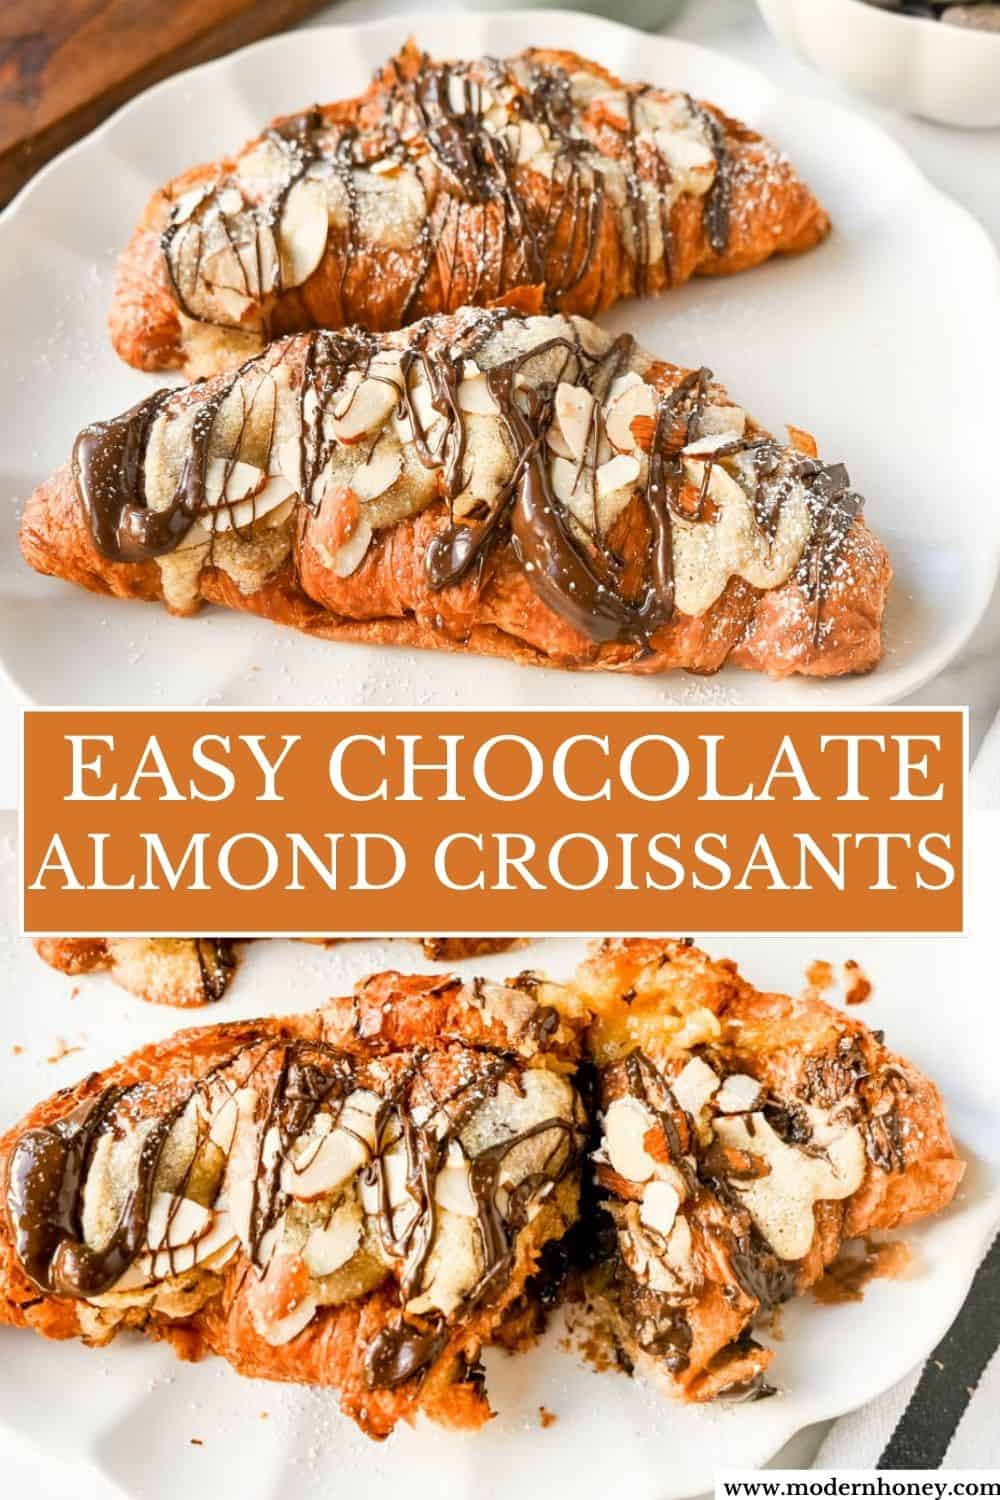 Easy Chocolate Almond Croissants. These quick and easy chocolate almond croissants use a shortcut by using day old croissants and filling them with a homemade almond filling and rich, decadent chocolate and baking until warm. These are the best almond chocolate croissants!